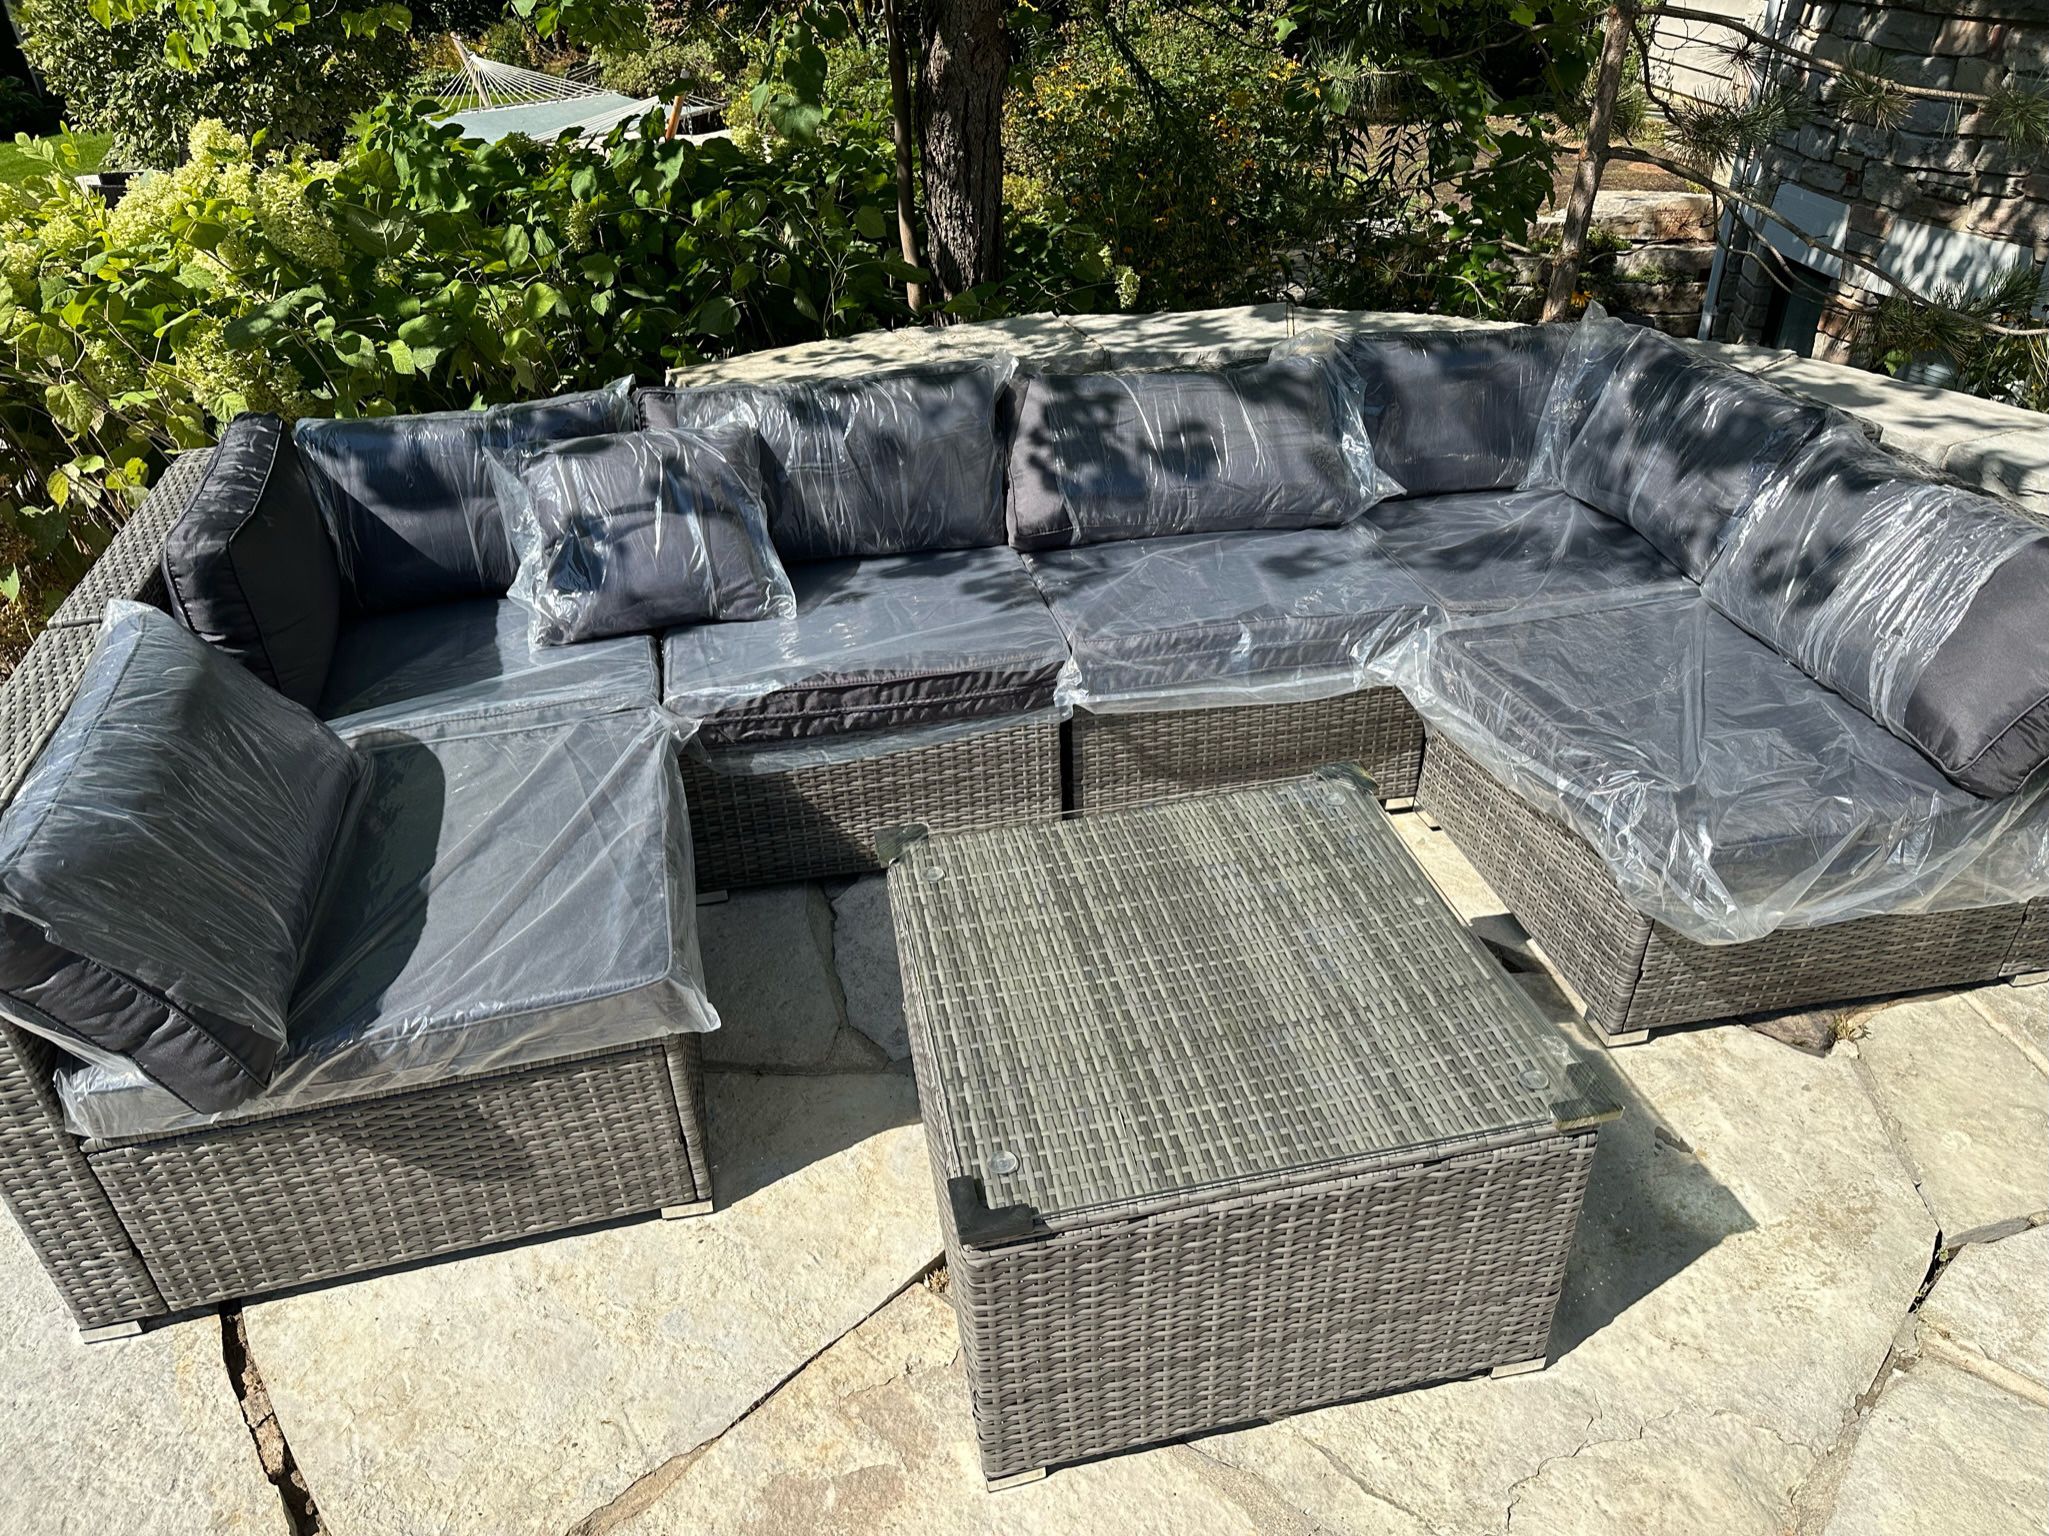 7 Piece Modular Patio Furniture Sectional Set w/Cushions Included **New**LOCAL DELIVERY*